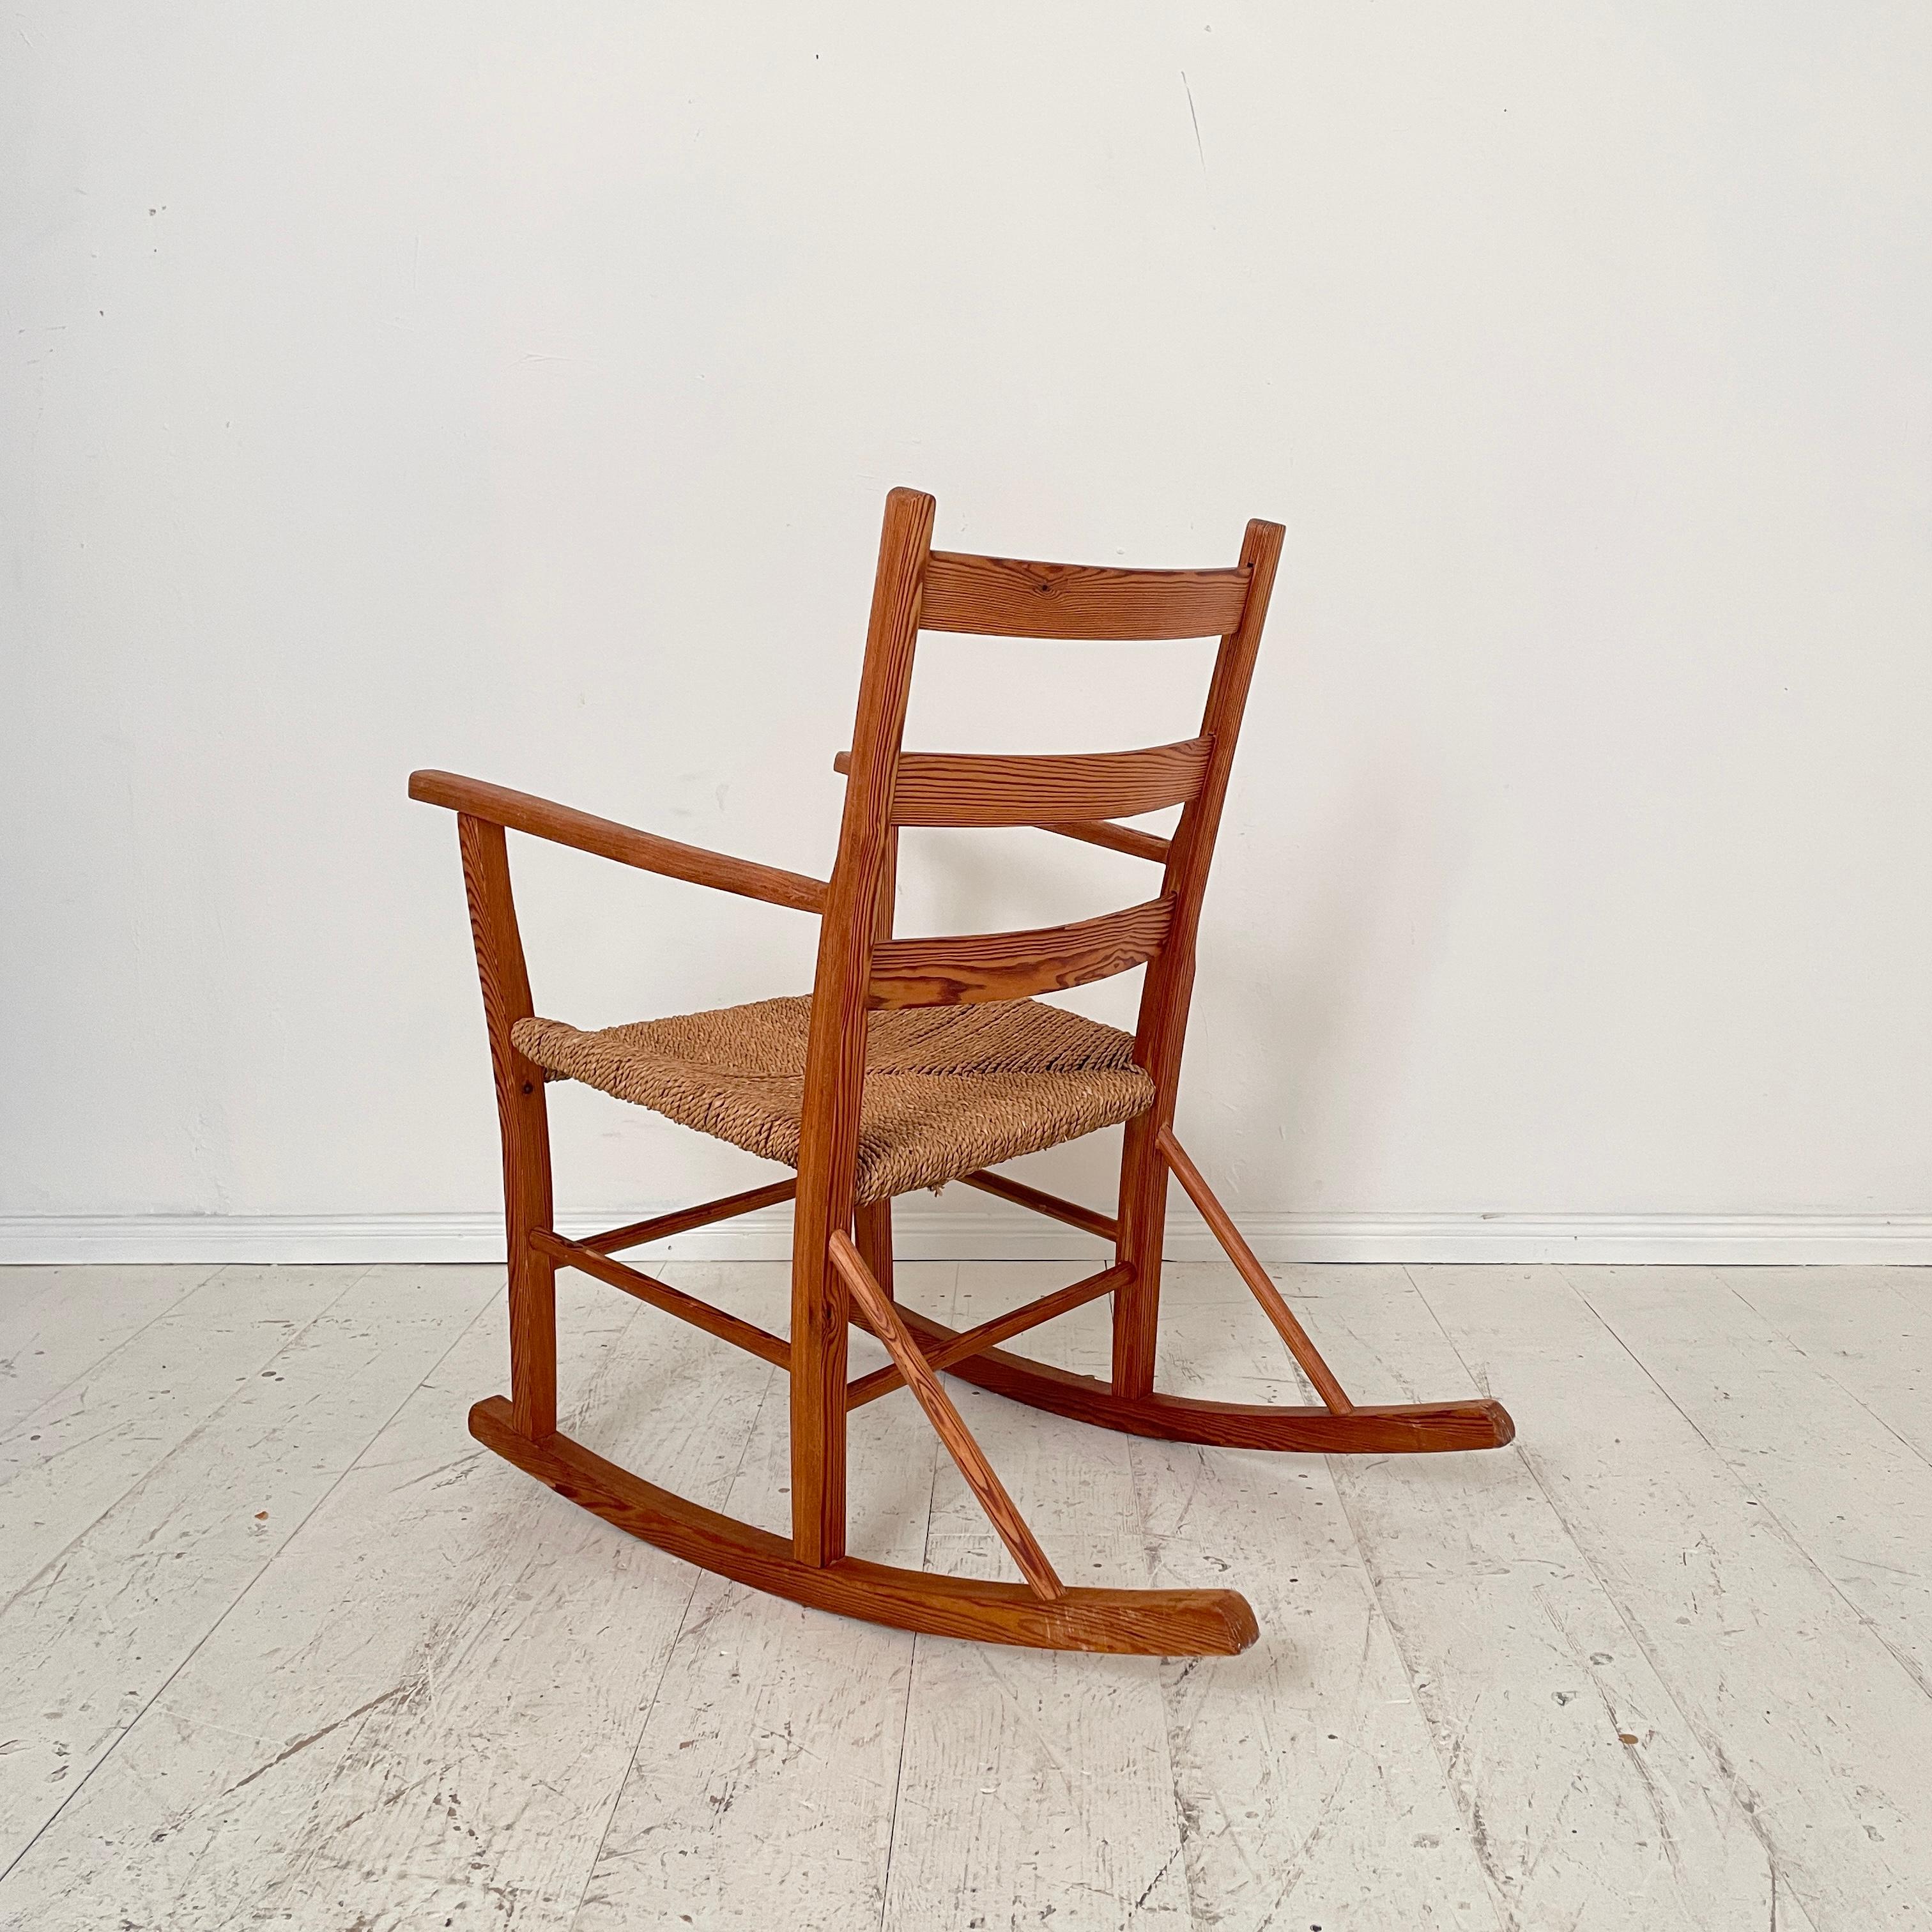 Norwegian Rocking Chair by Aksel Hansson in Pine, 1930 For Sale 2